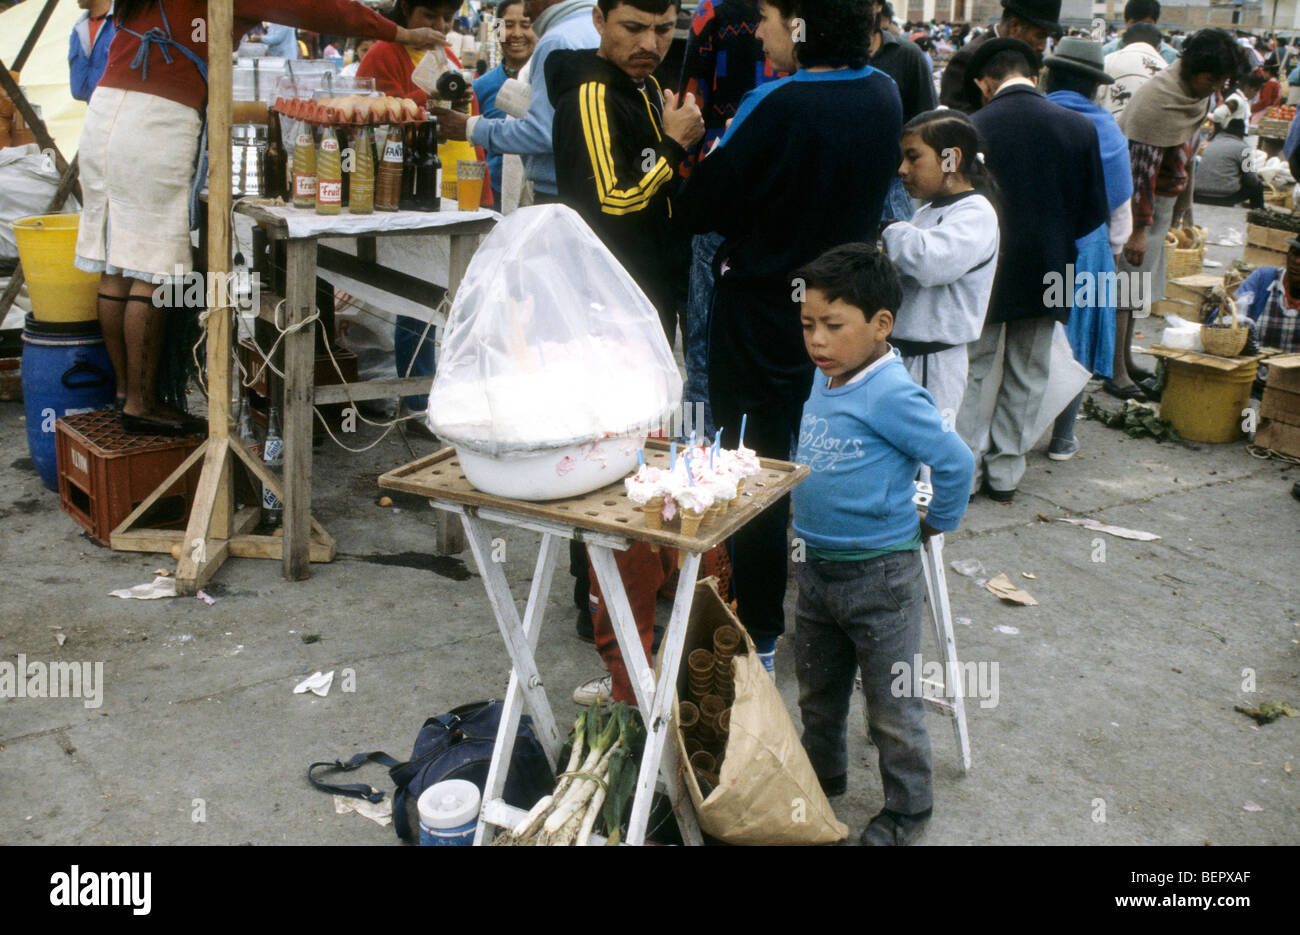 Young boy looks longingly at line of ice cream cones in local upland Ecuador market. Stock Photo